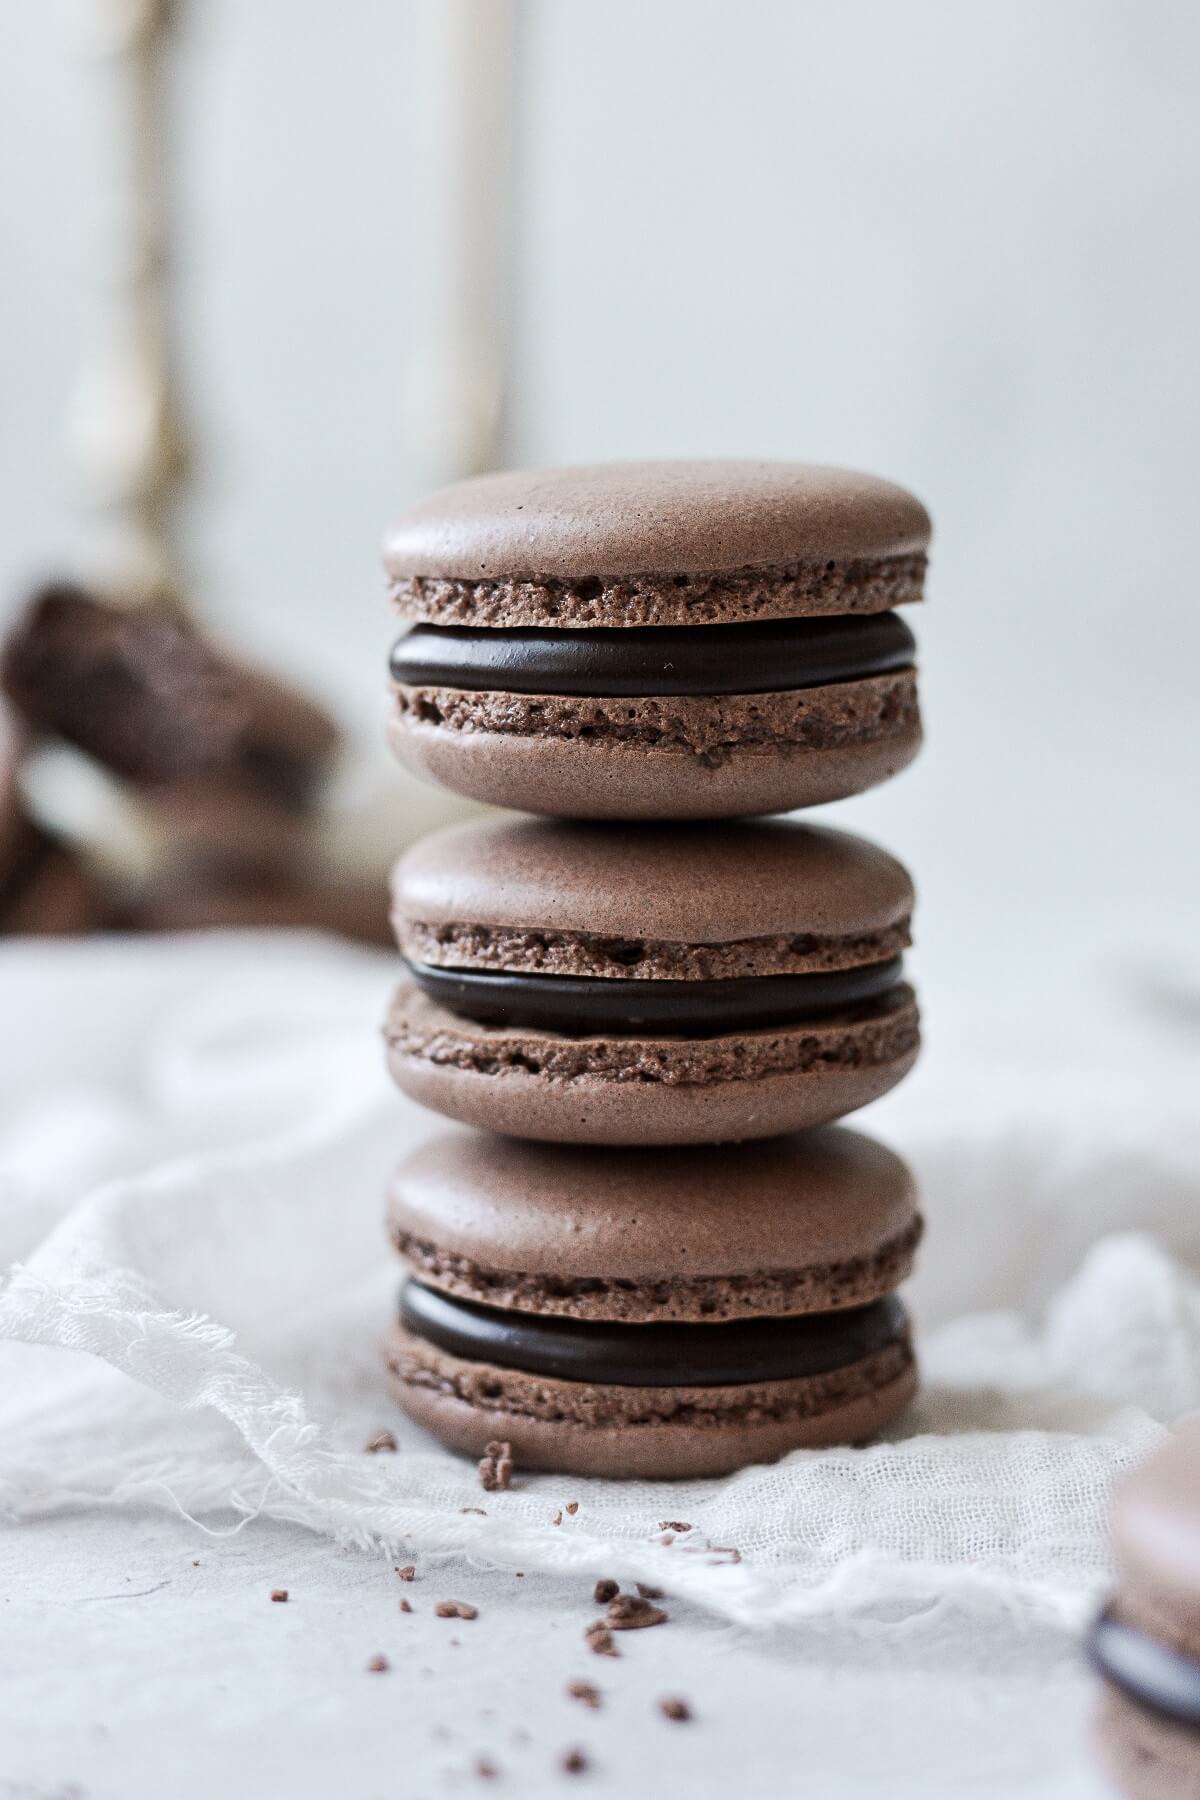 A stack of chocolate macarons, filled with dark chocolate ganache.